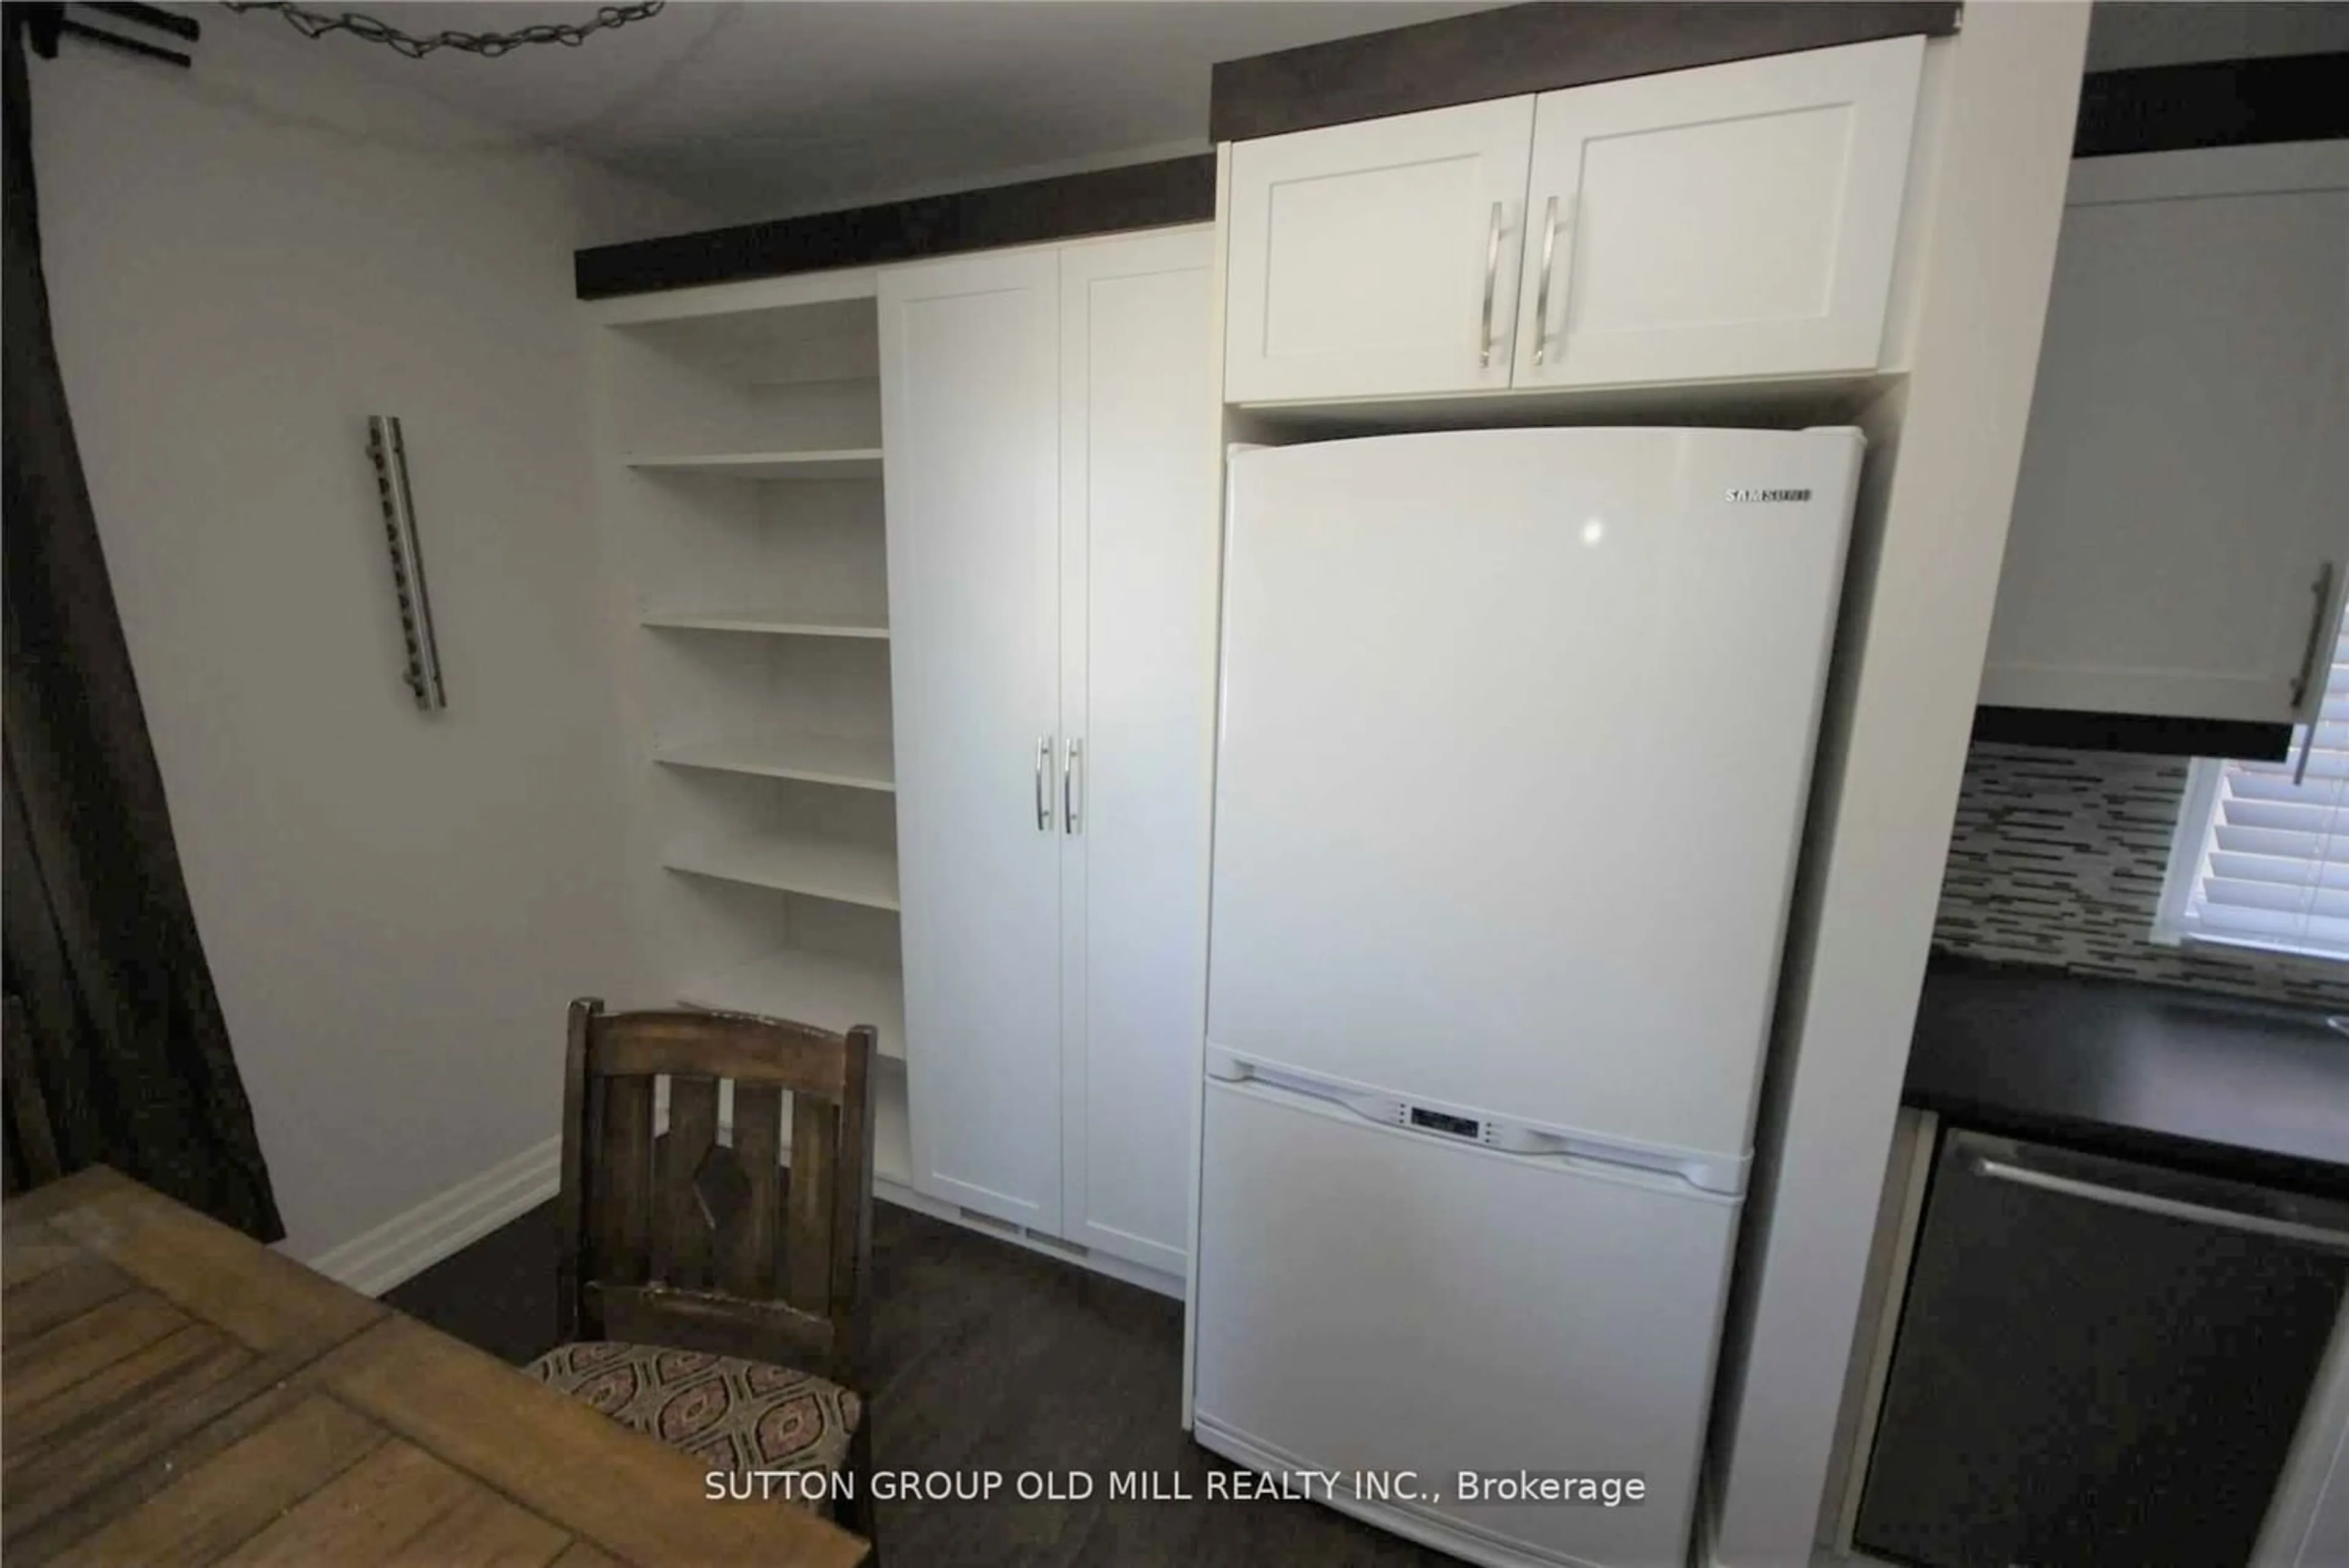 Storage room or clothes room or walk-in closet for 112 Stephen Dr, Toronto Ontario M8Y 3N3